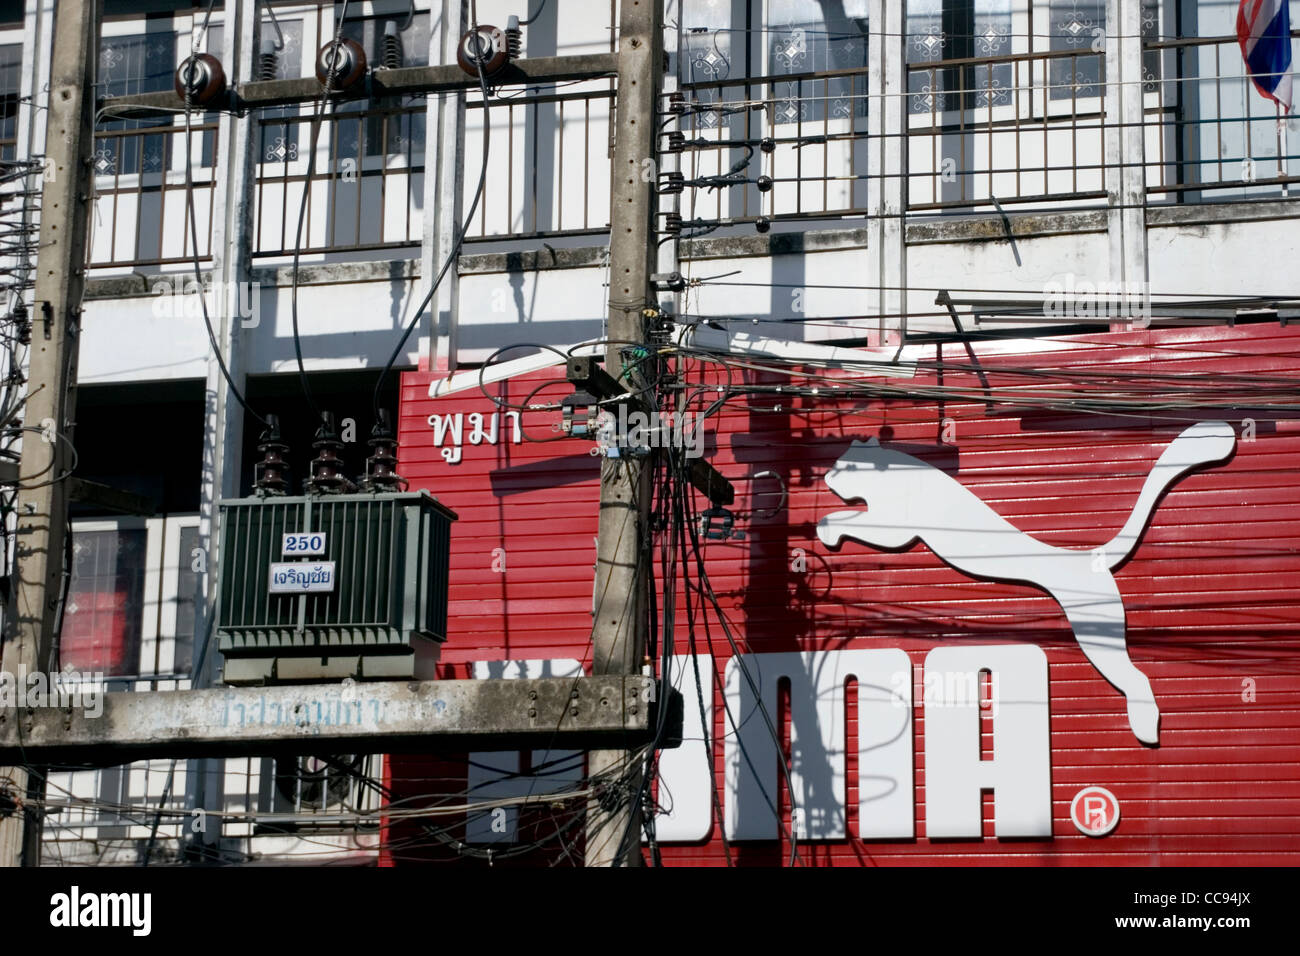 A large Puma sign is on display high above urban housing on a city street  in Chiang Rai, Thailand Stock Photo - Alamy